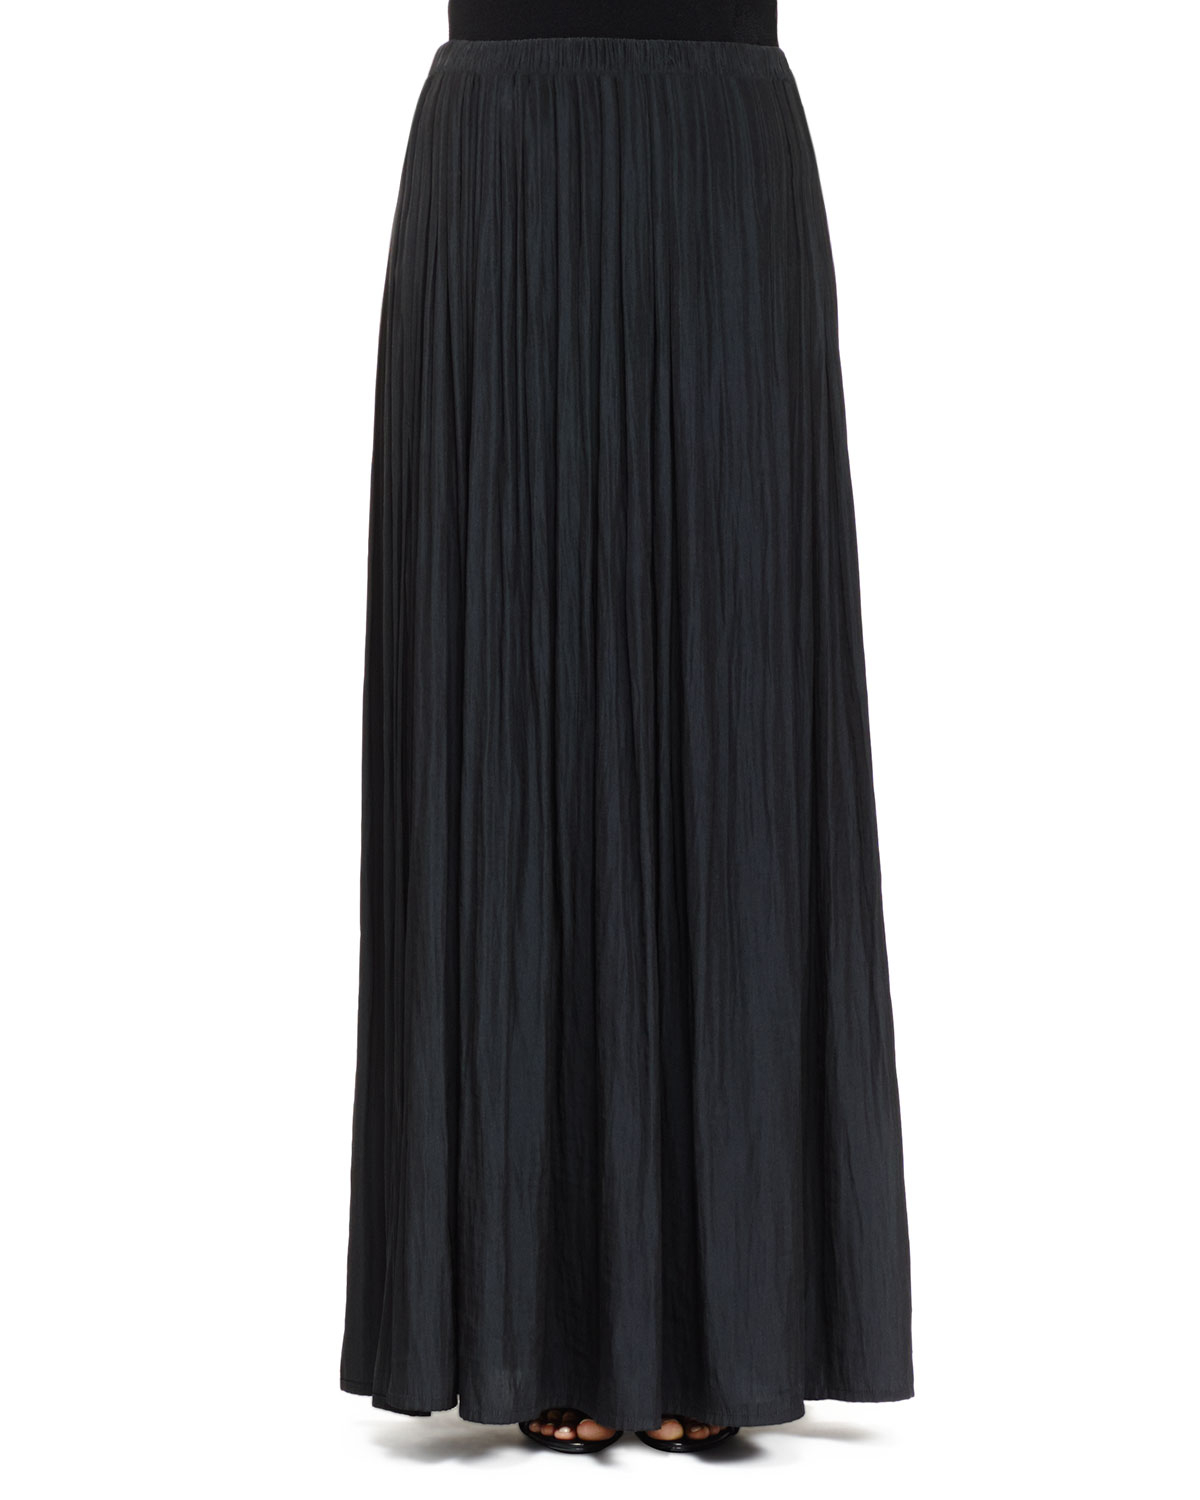 Lyst - Lanvin Long Pleated Washed Satin Skirt in Black